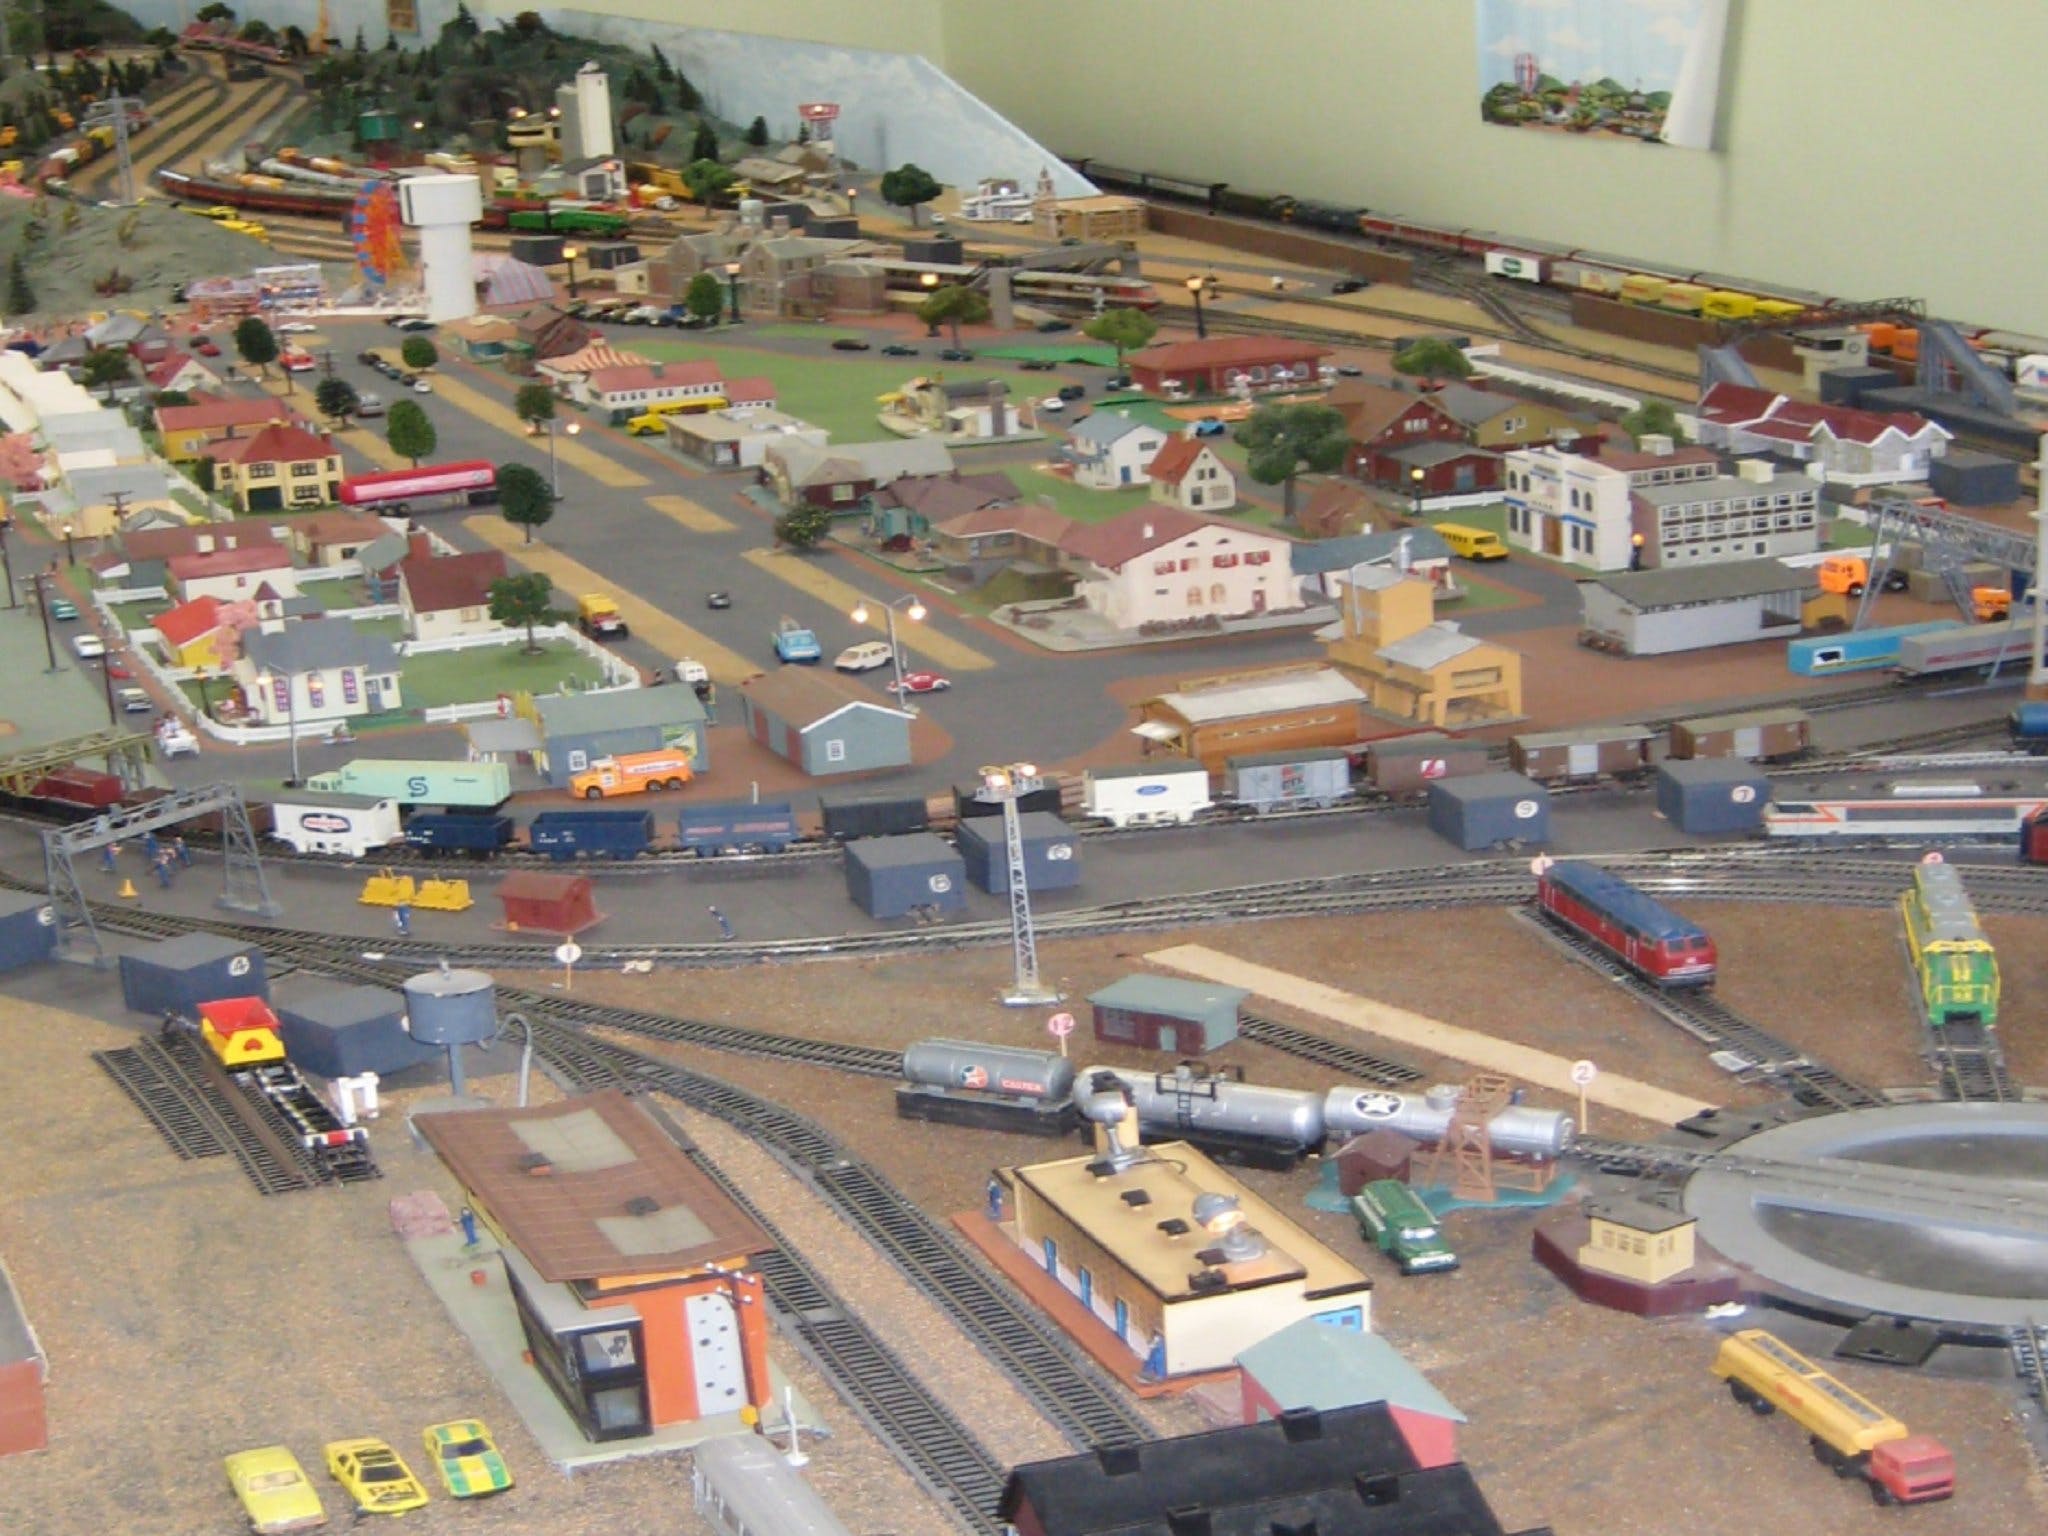 Heywood Model Trains - Tourism Cairns